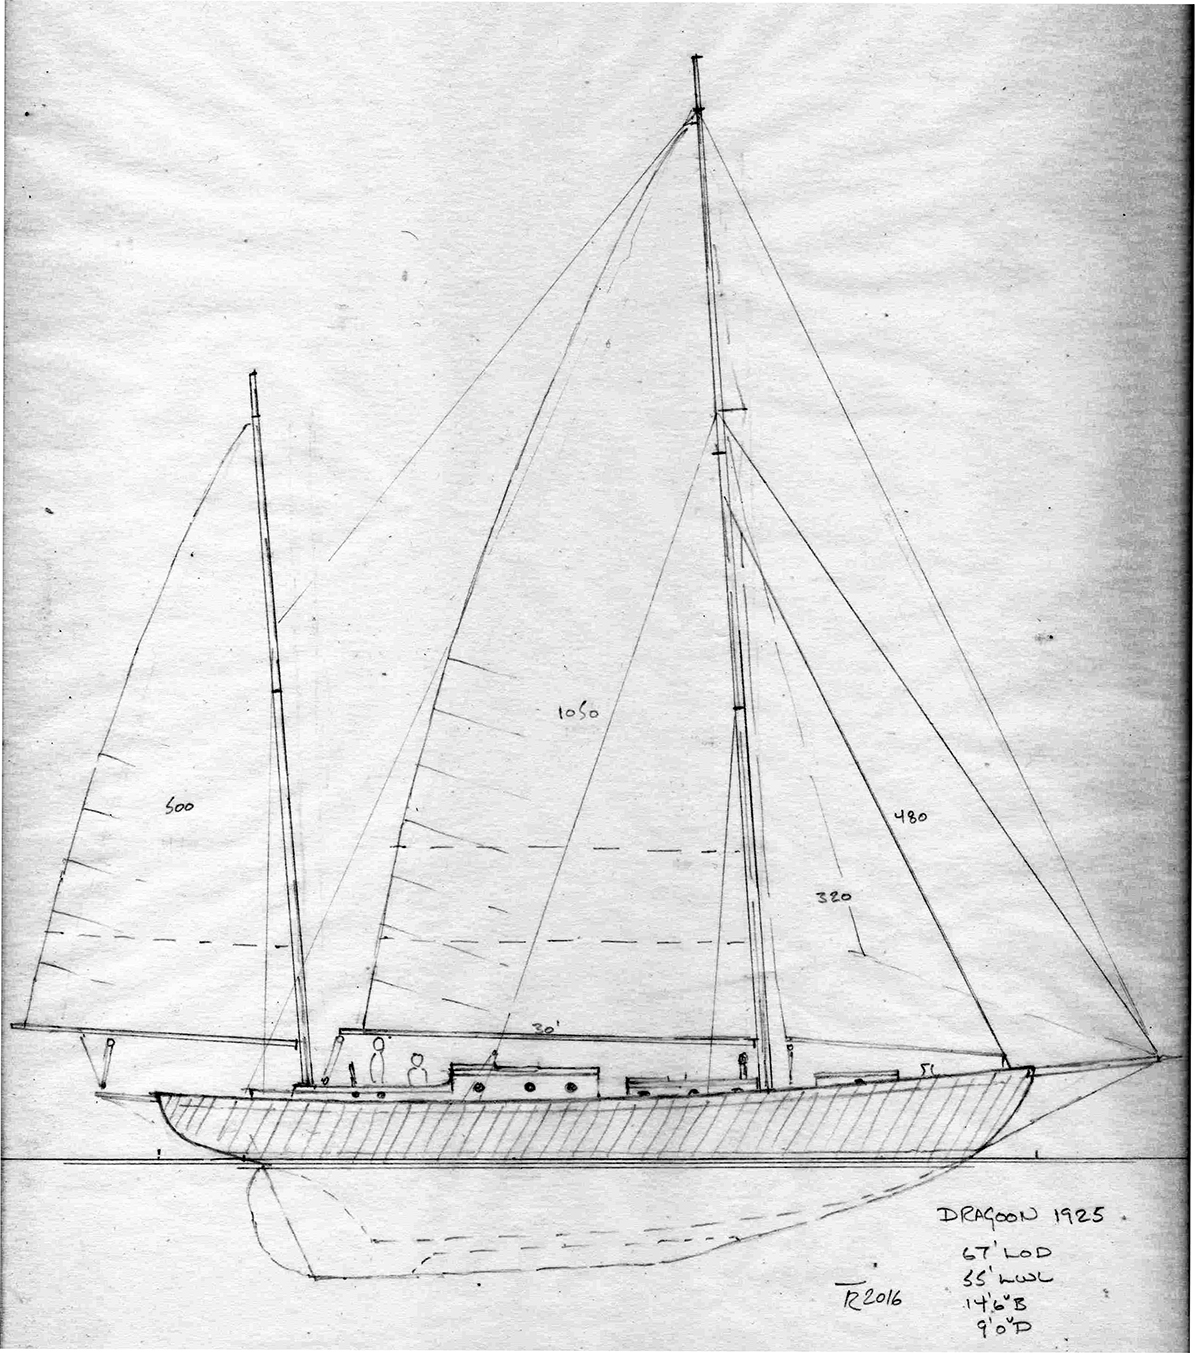 Sketch Sailplan of Dragoon re-created by Tad Roberts